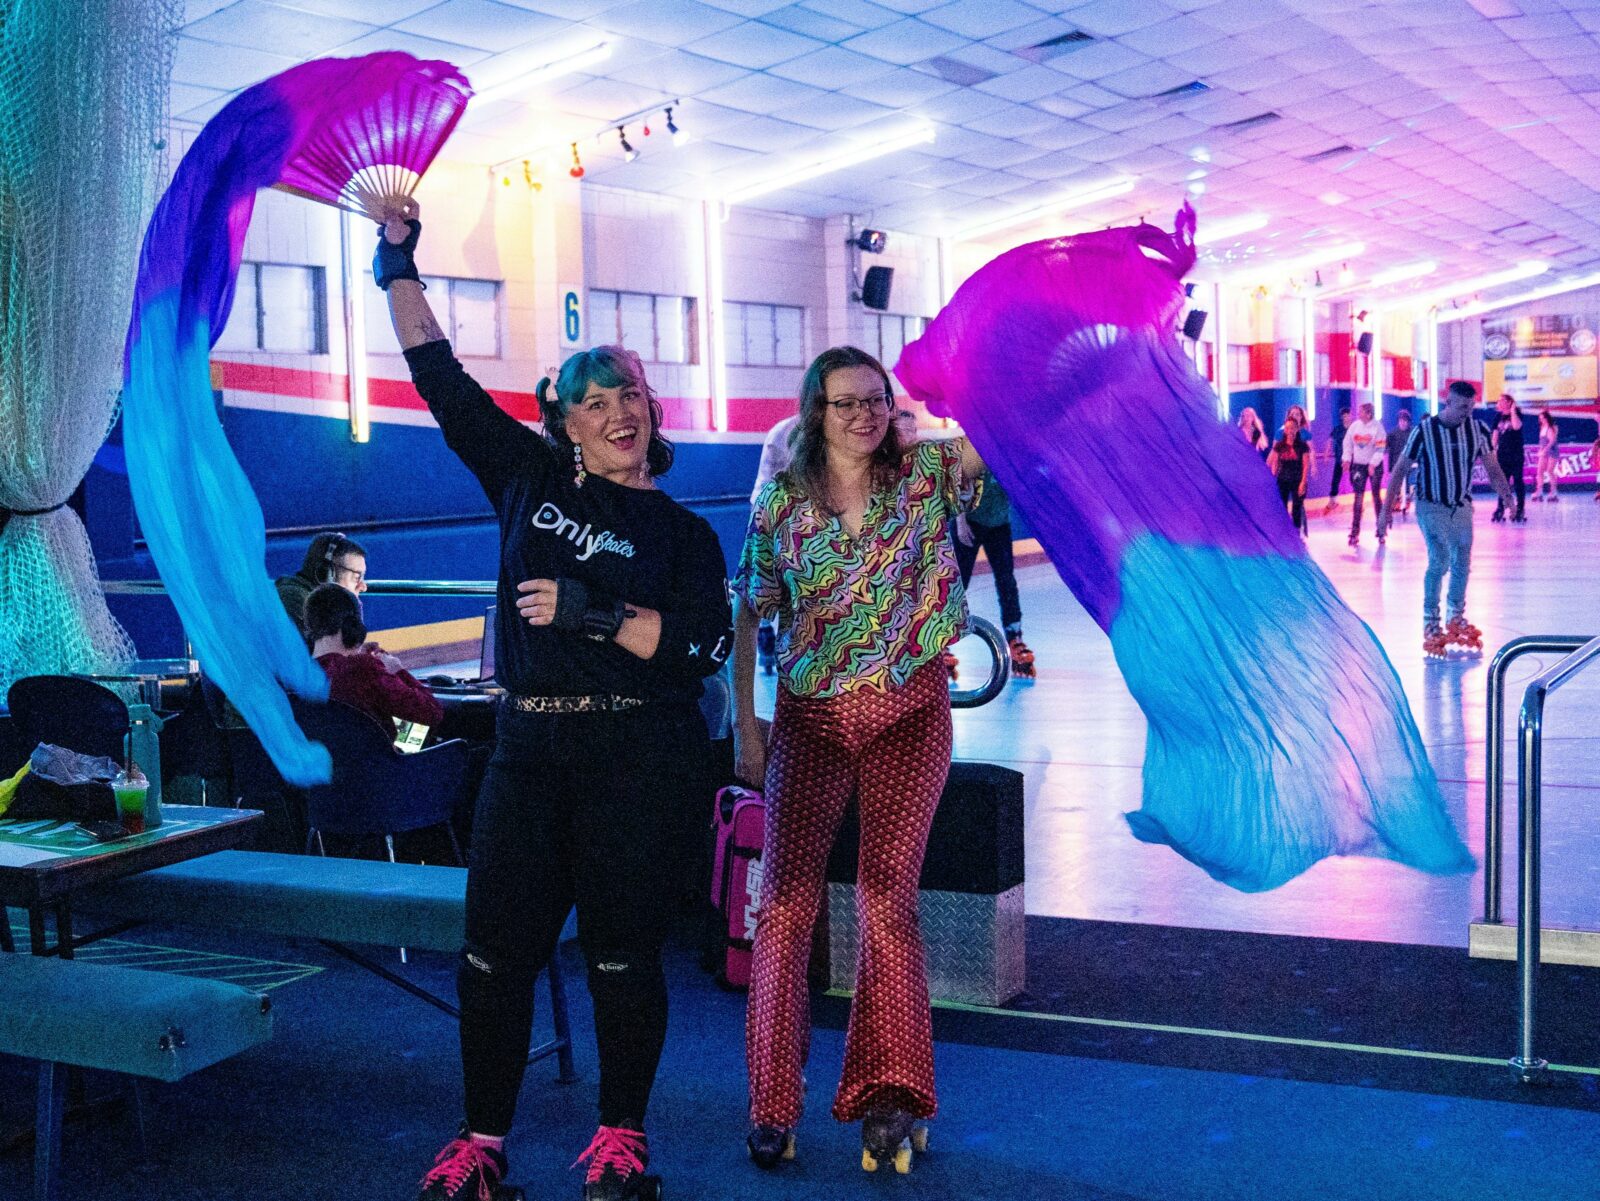 Two people waving colourful silks near a skate rink